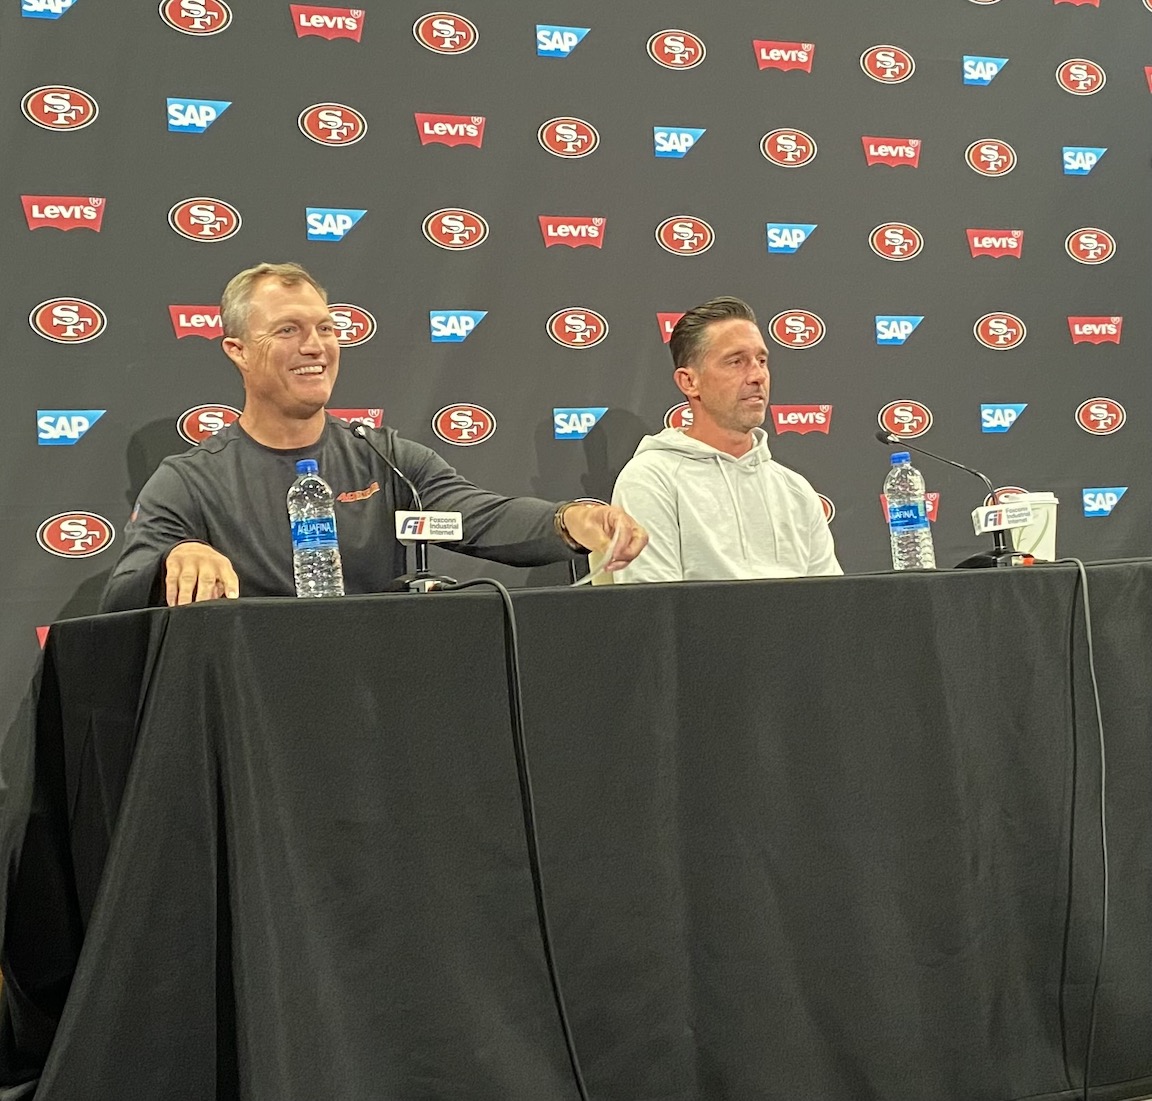 ‘Never were we just going to give him away.’ 49ers GM John Lynch on Jimmy Garoppolo